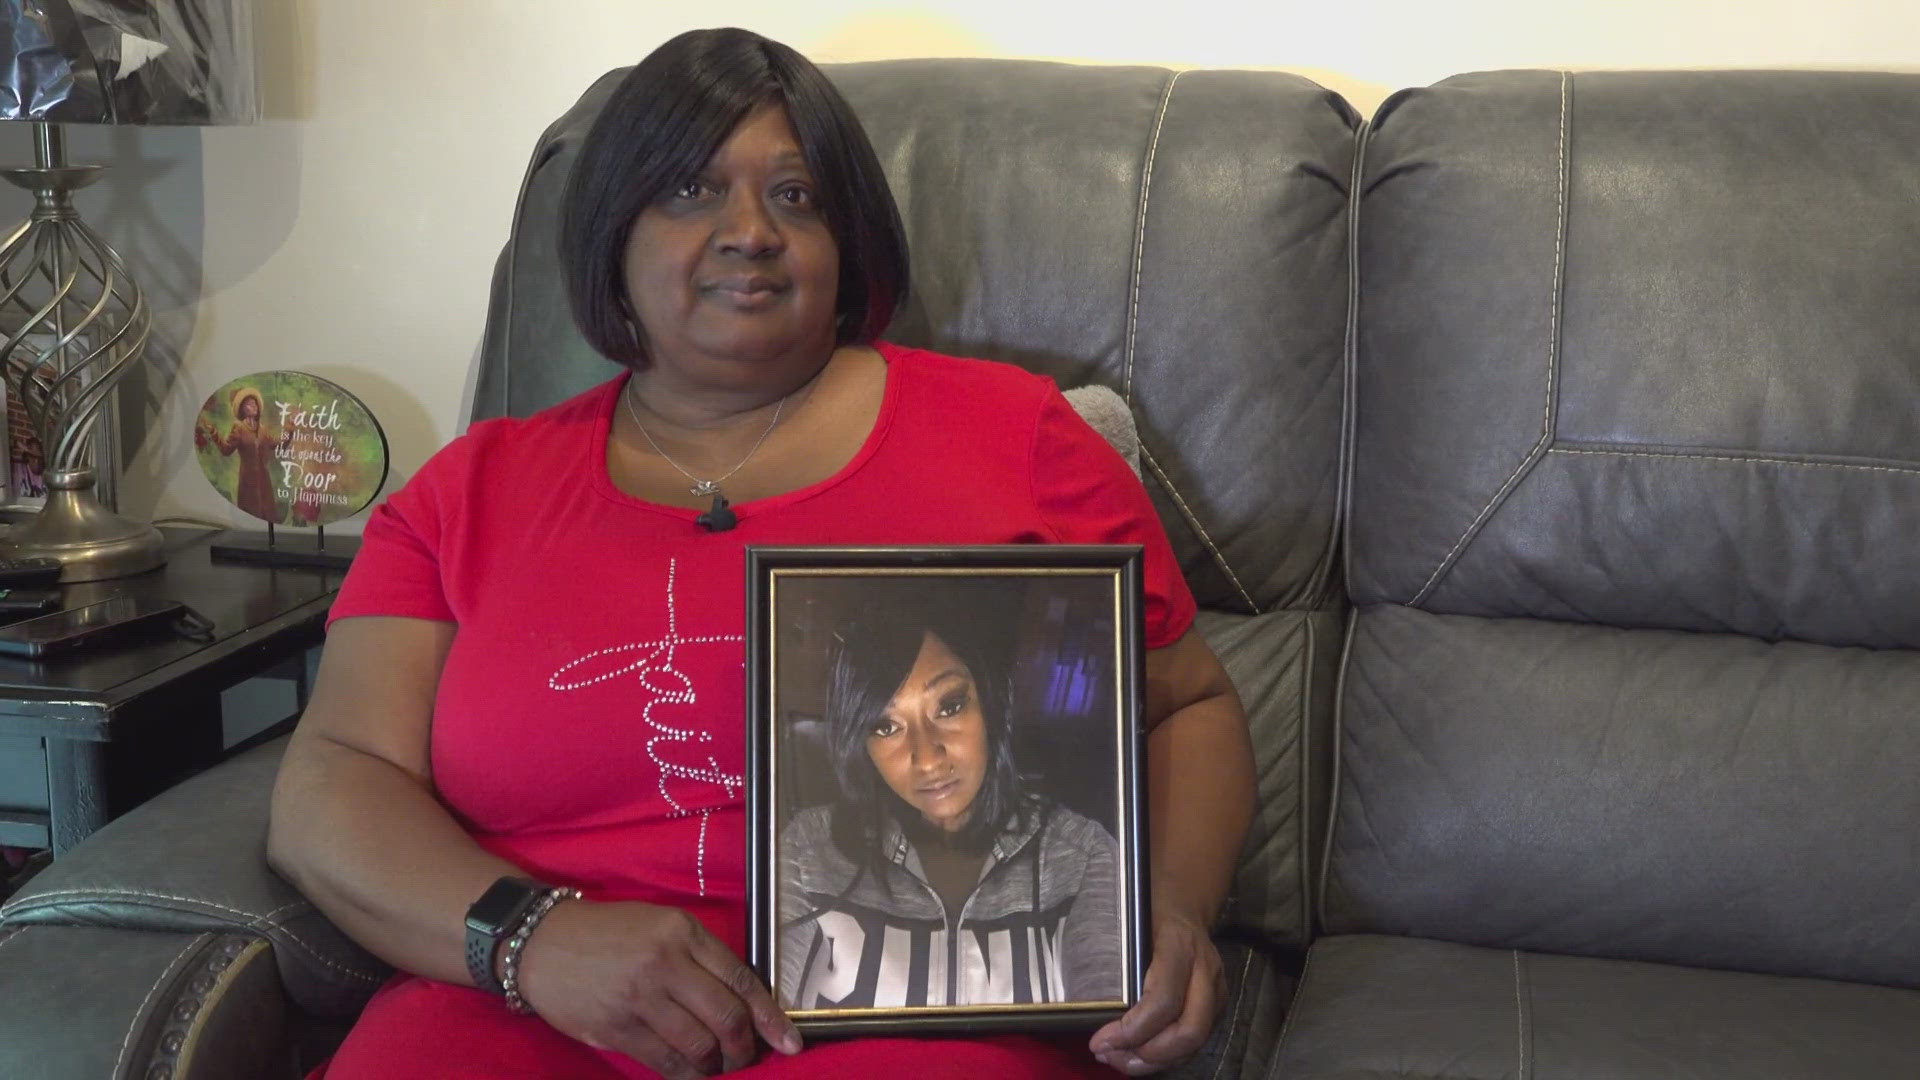 Family calls for answers after the double murders of Shaquanna Hudson and Jermaine Wilson.